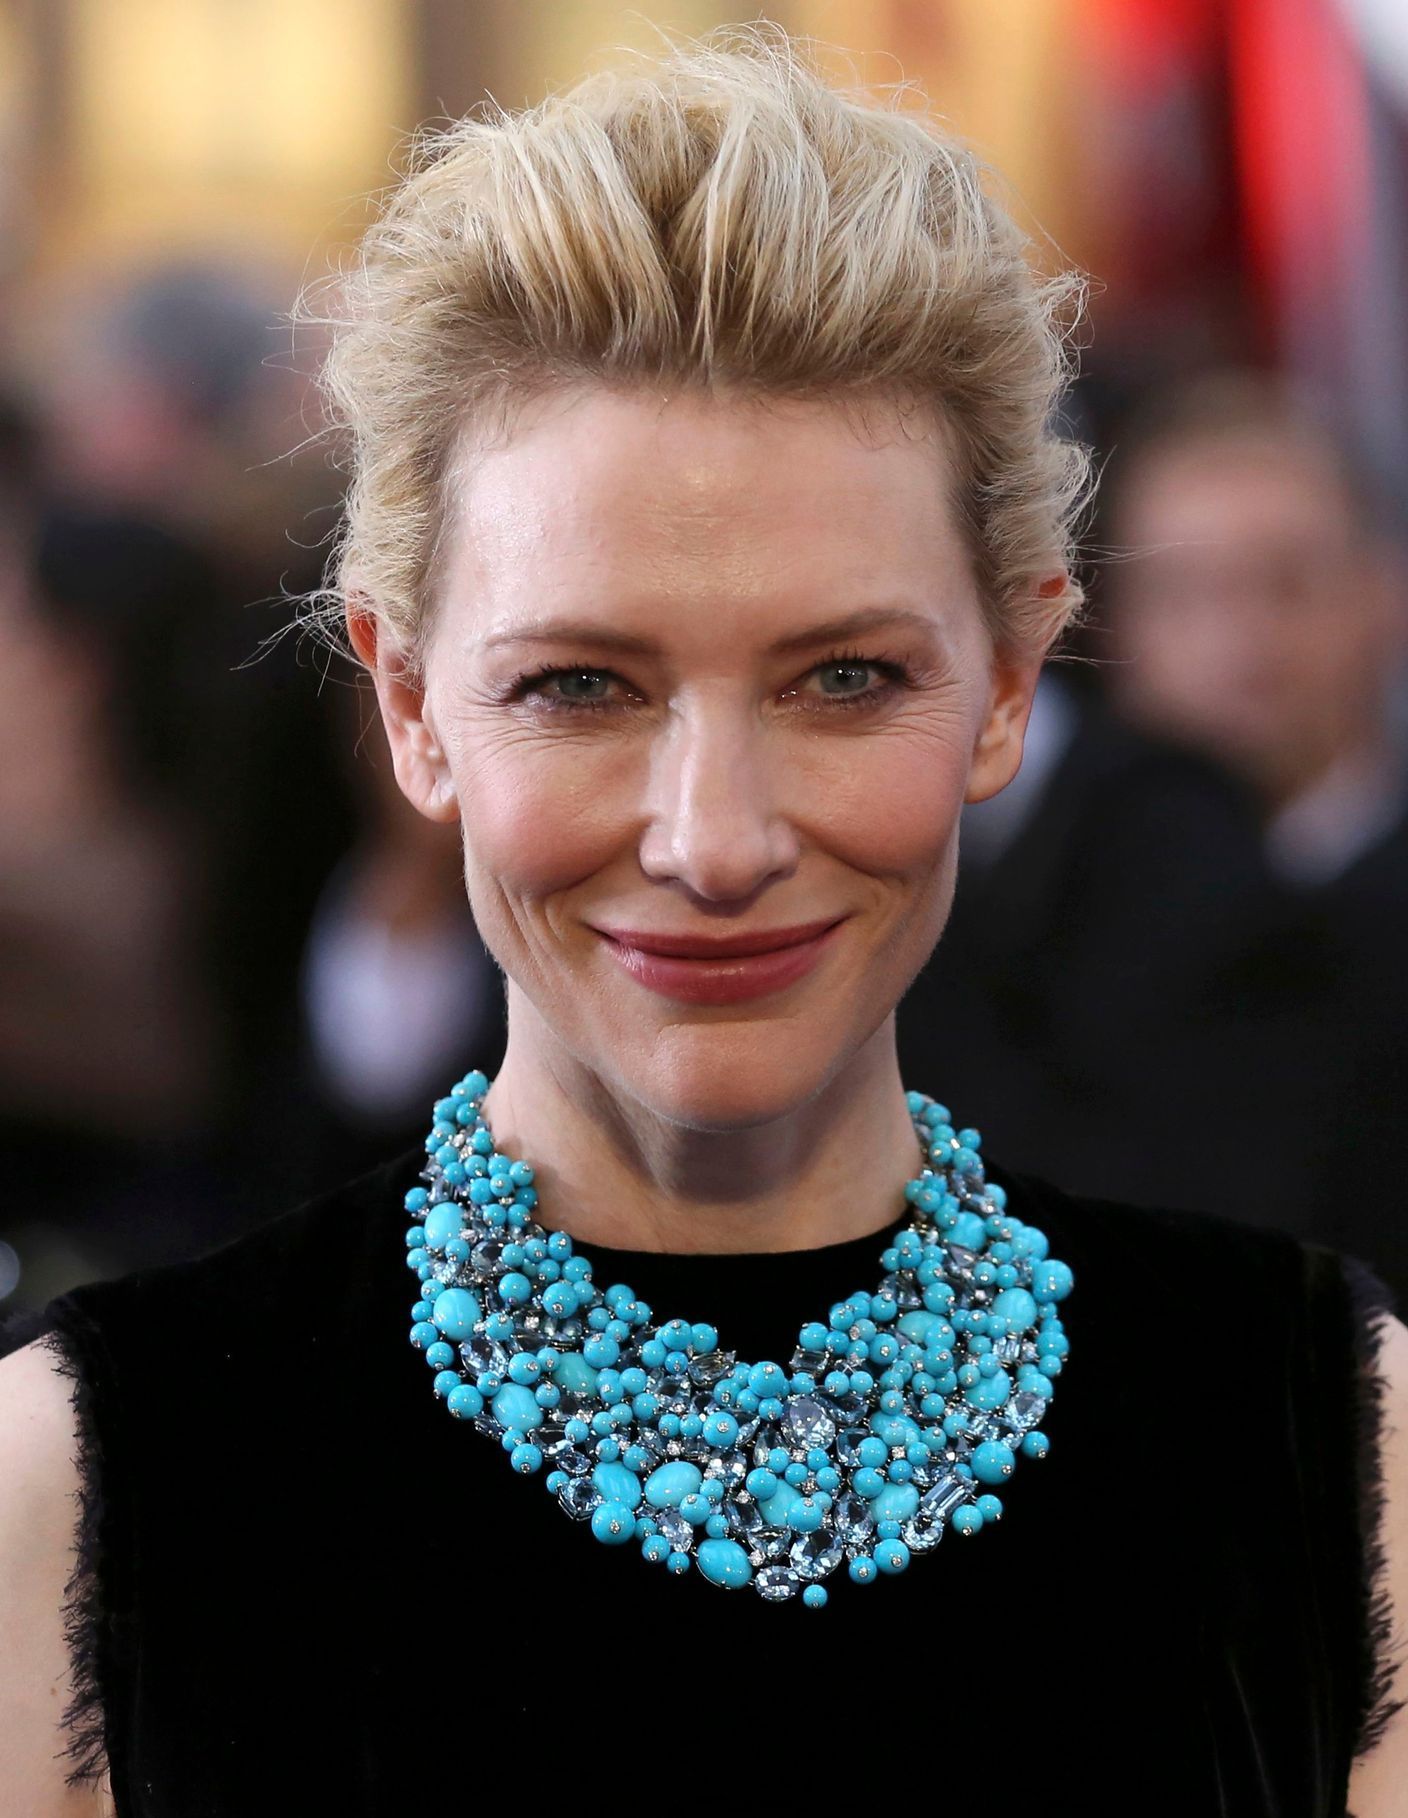 Presenter Cate Blanchett arrvies at the 87th Academy Awards in Hollywood